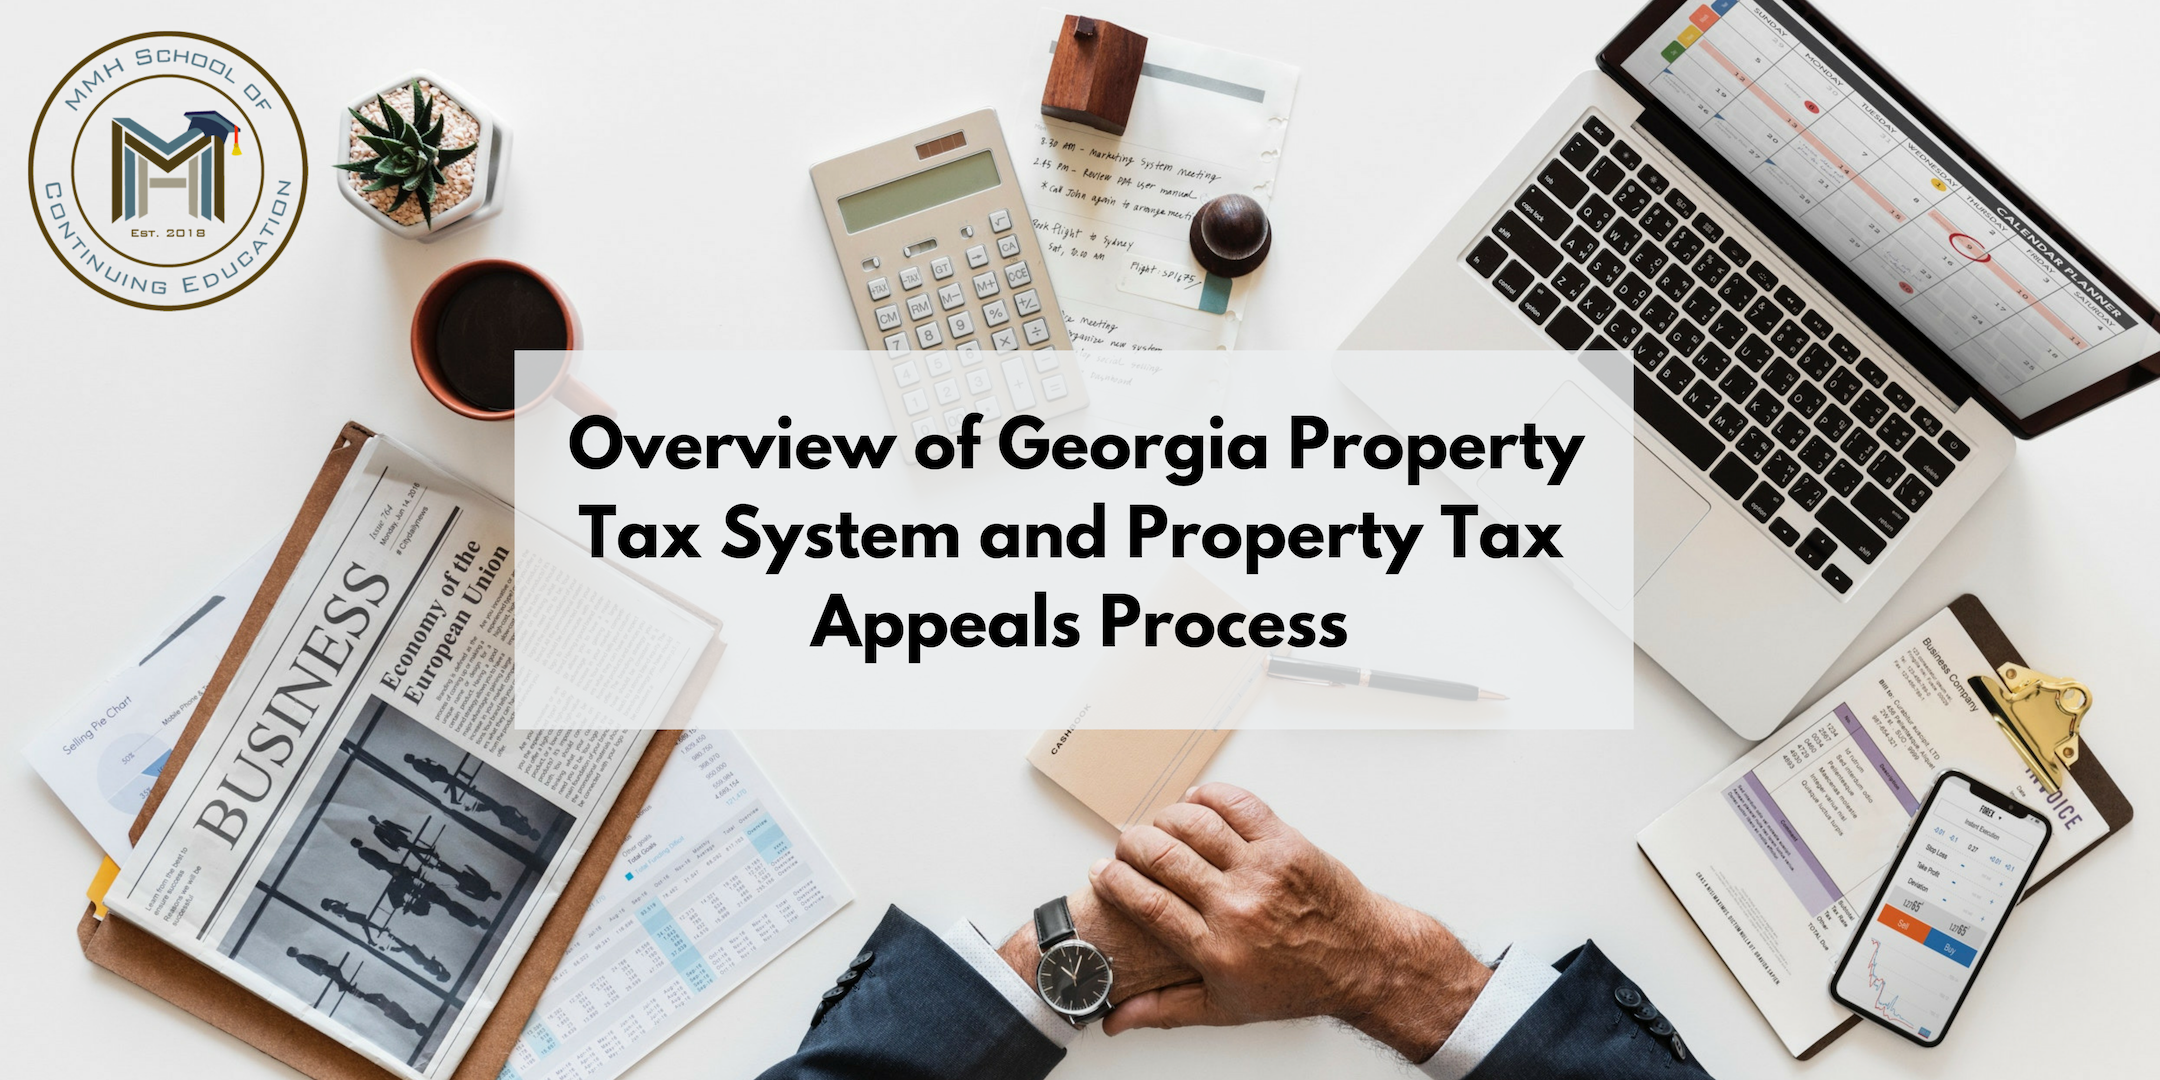 Overview of Georgia Property Tax System & Property Tax Appeals Process